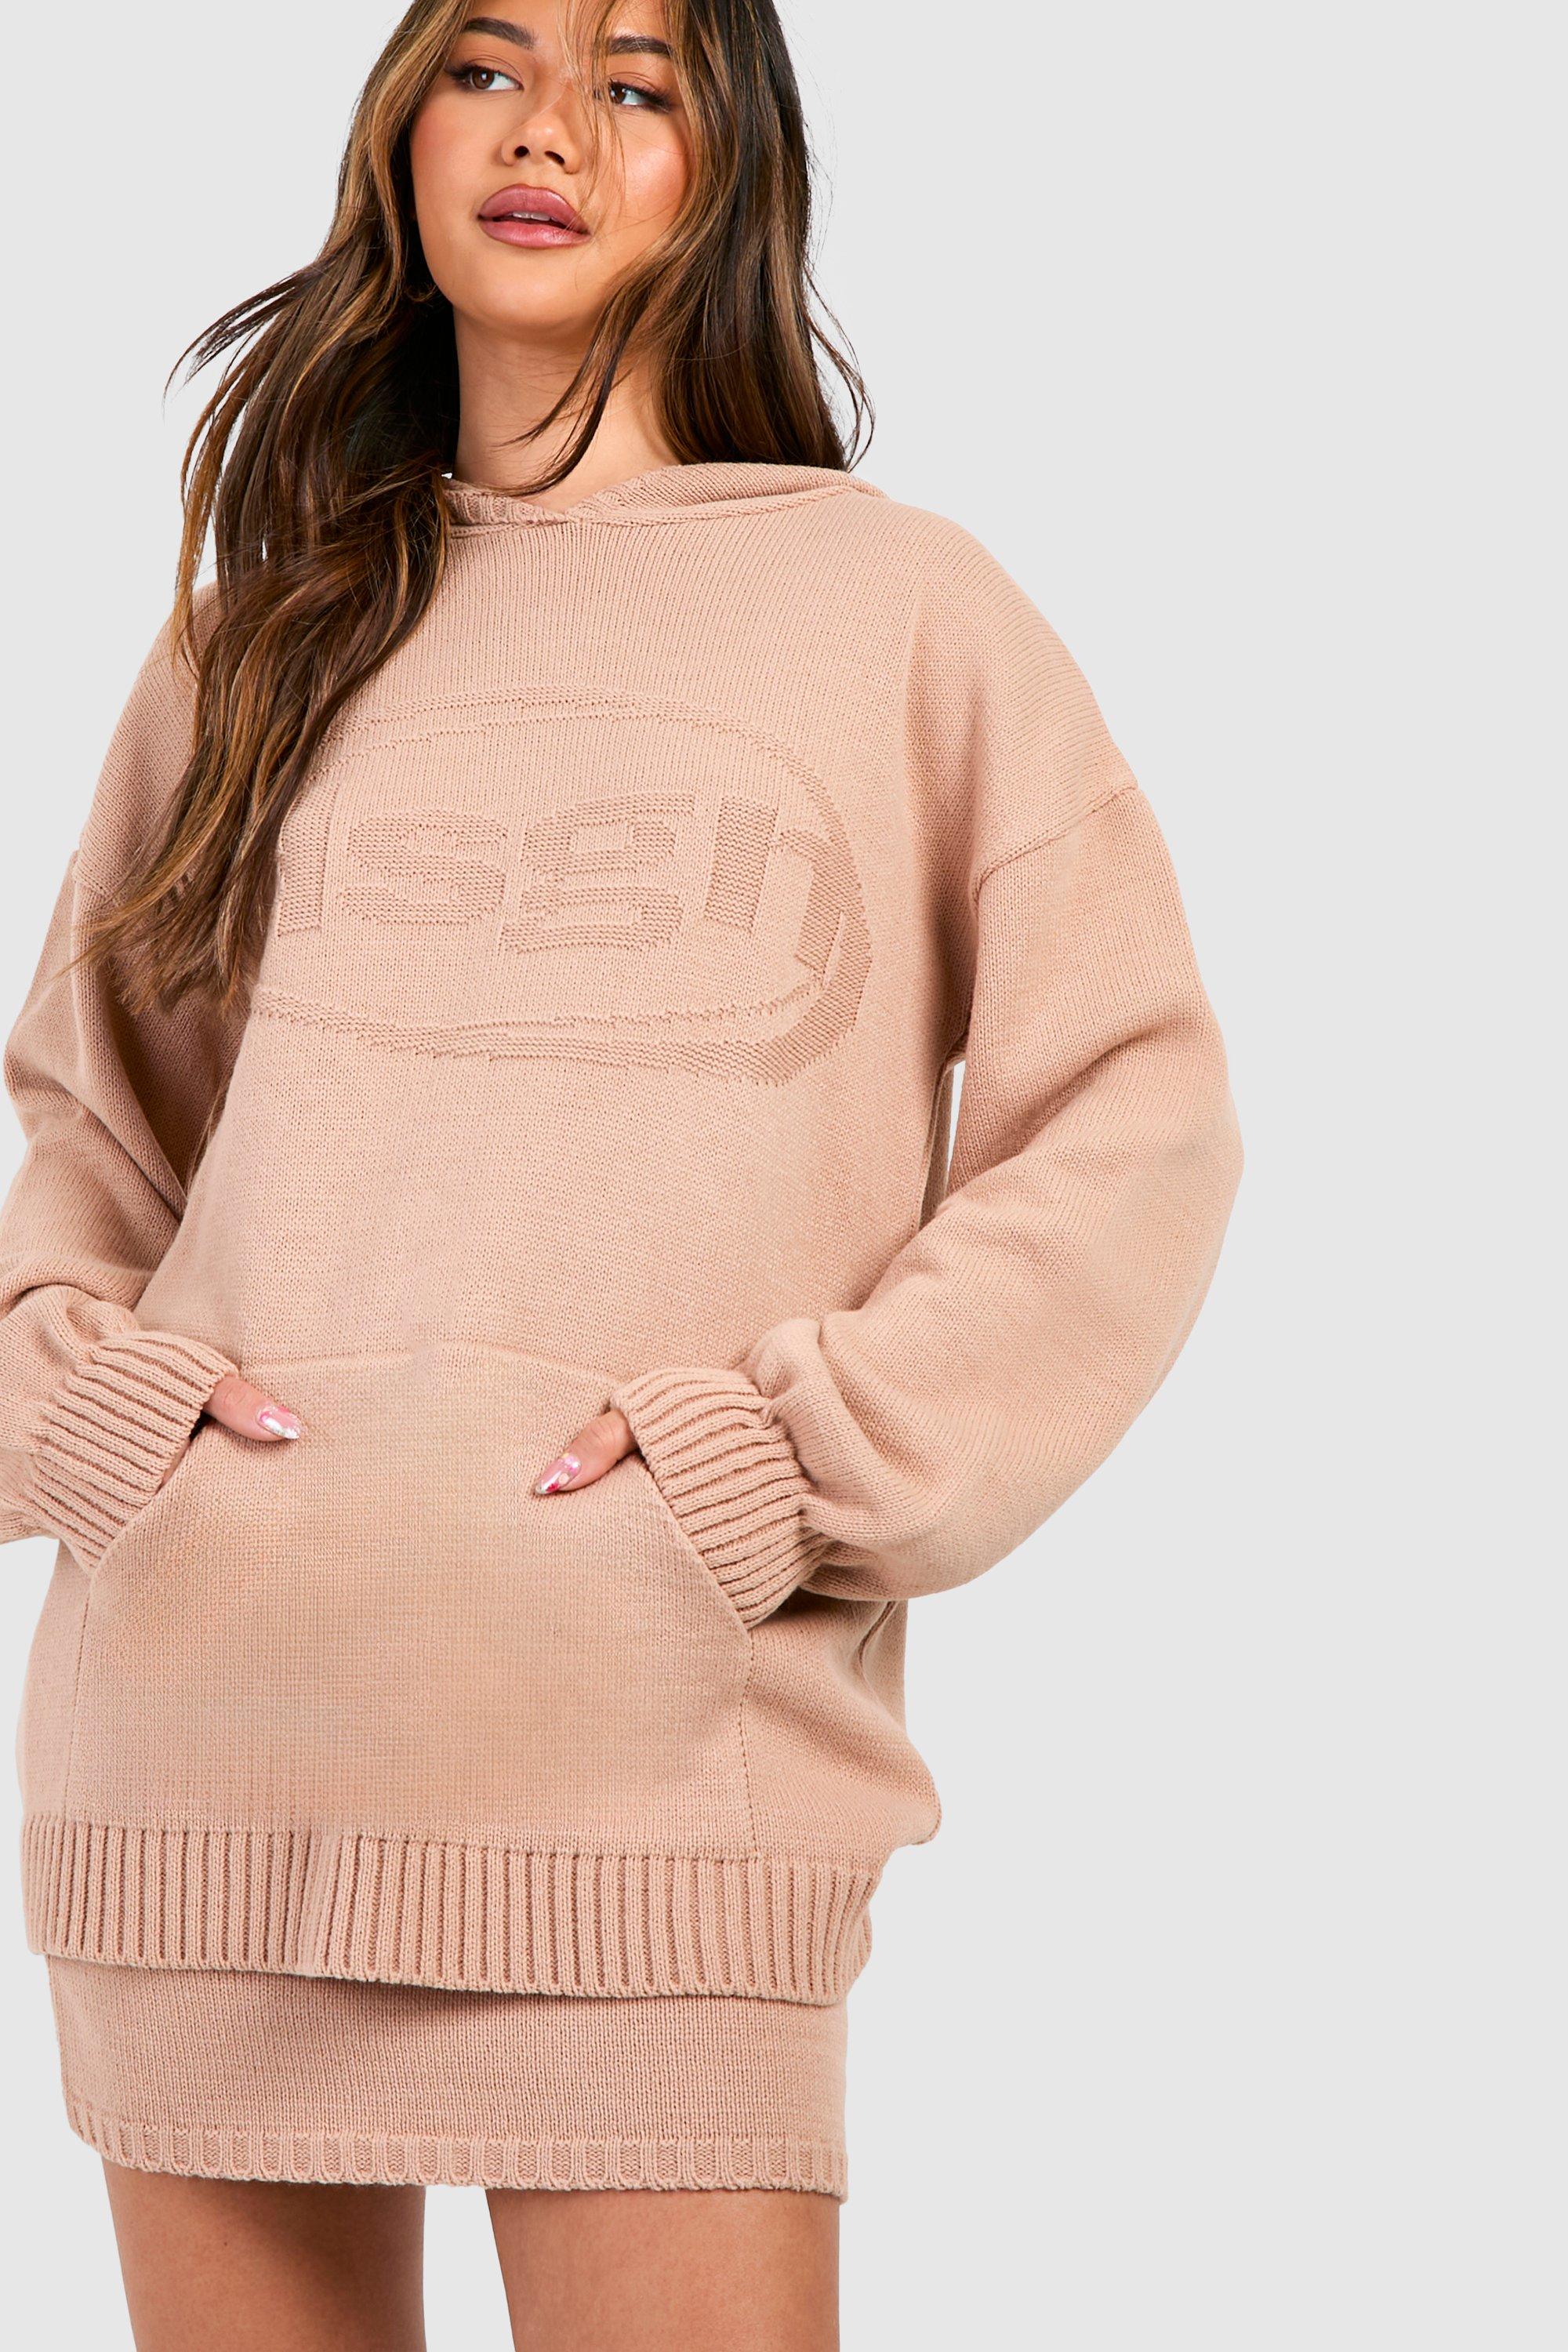 Image of Dsgn Embossed Hoody And Mini Skirt Knitted Set, Beige